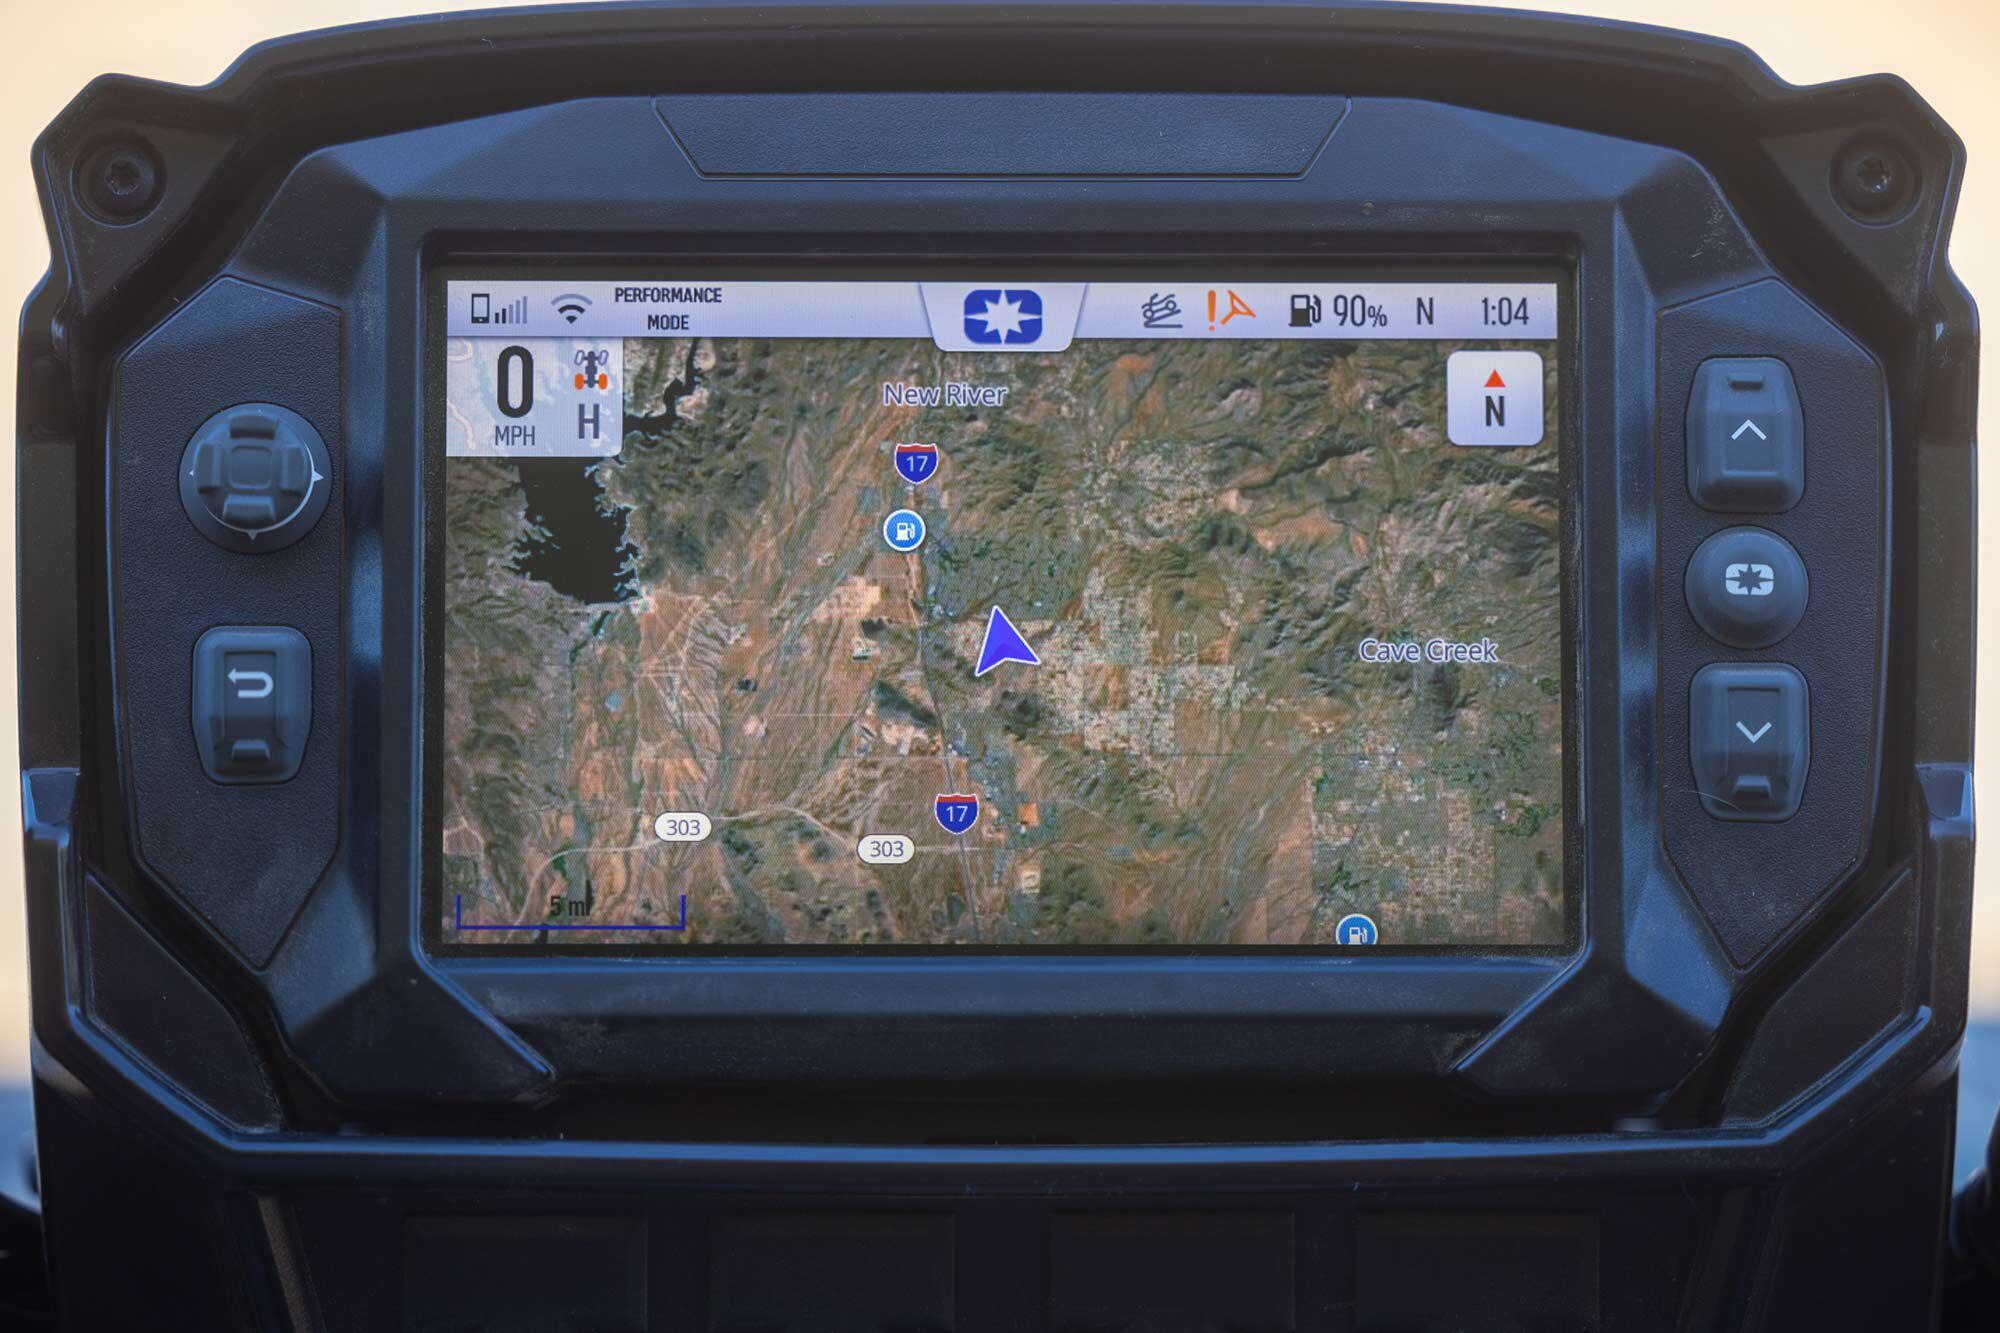 Ride Command 7-inch glove-touch display with full-color satellite GPS screen.